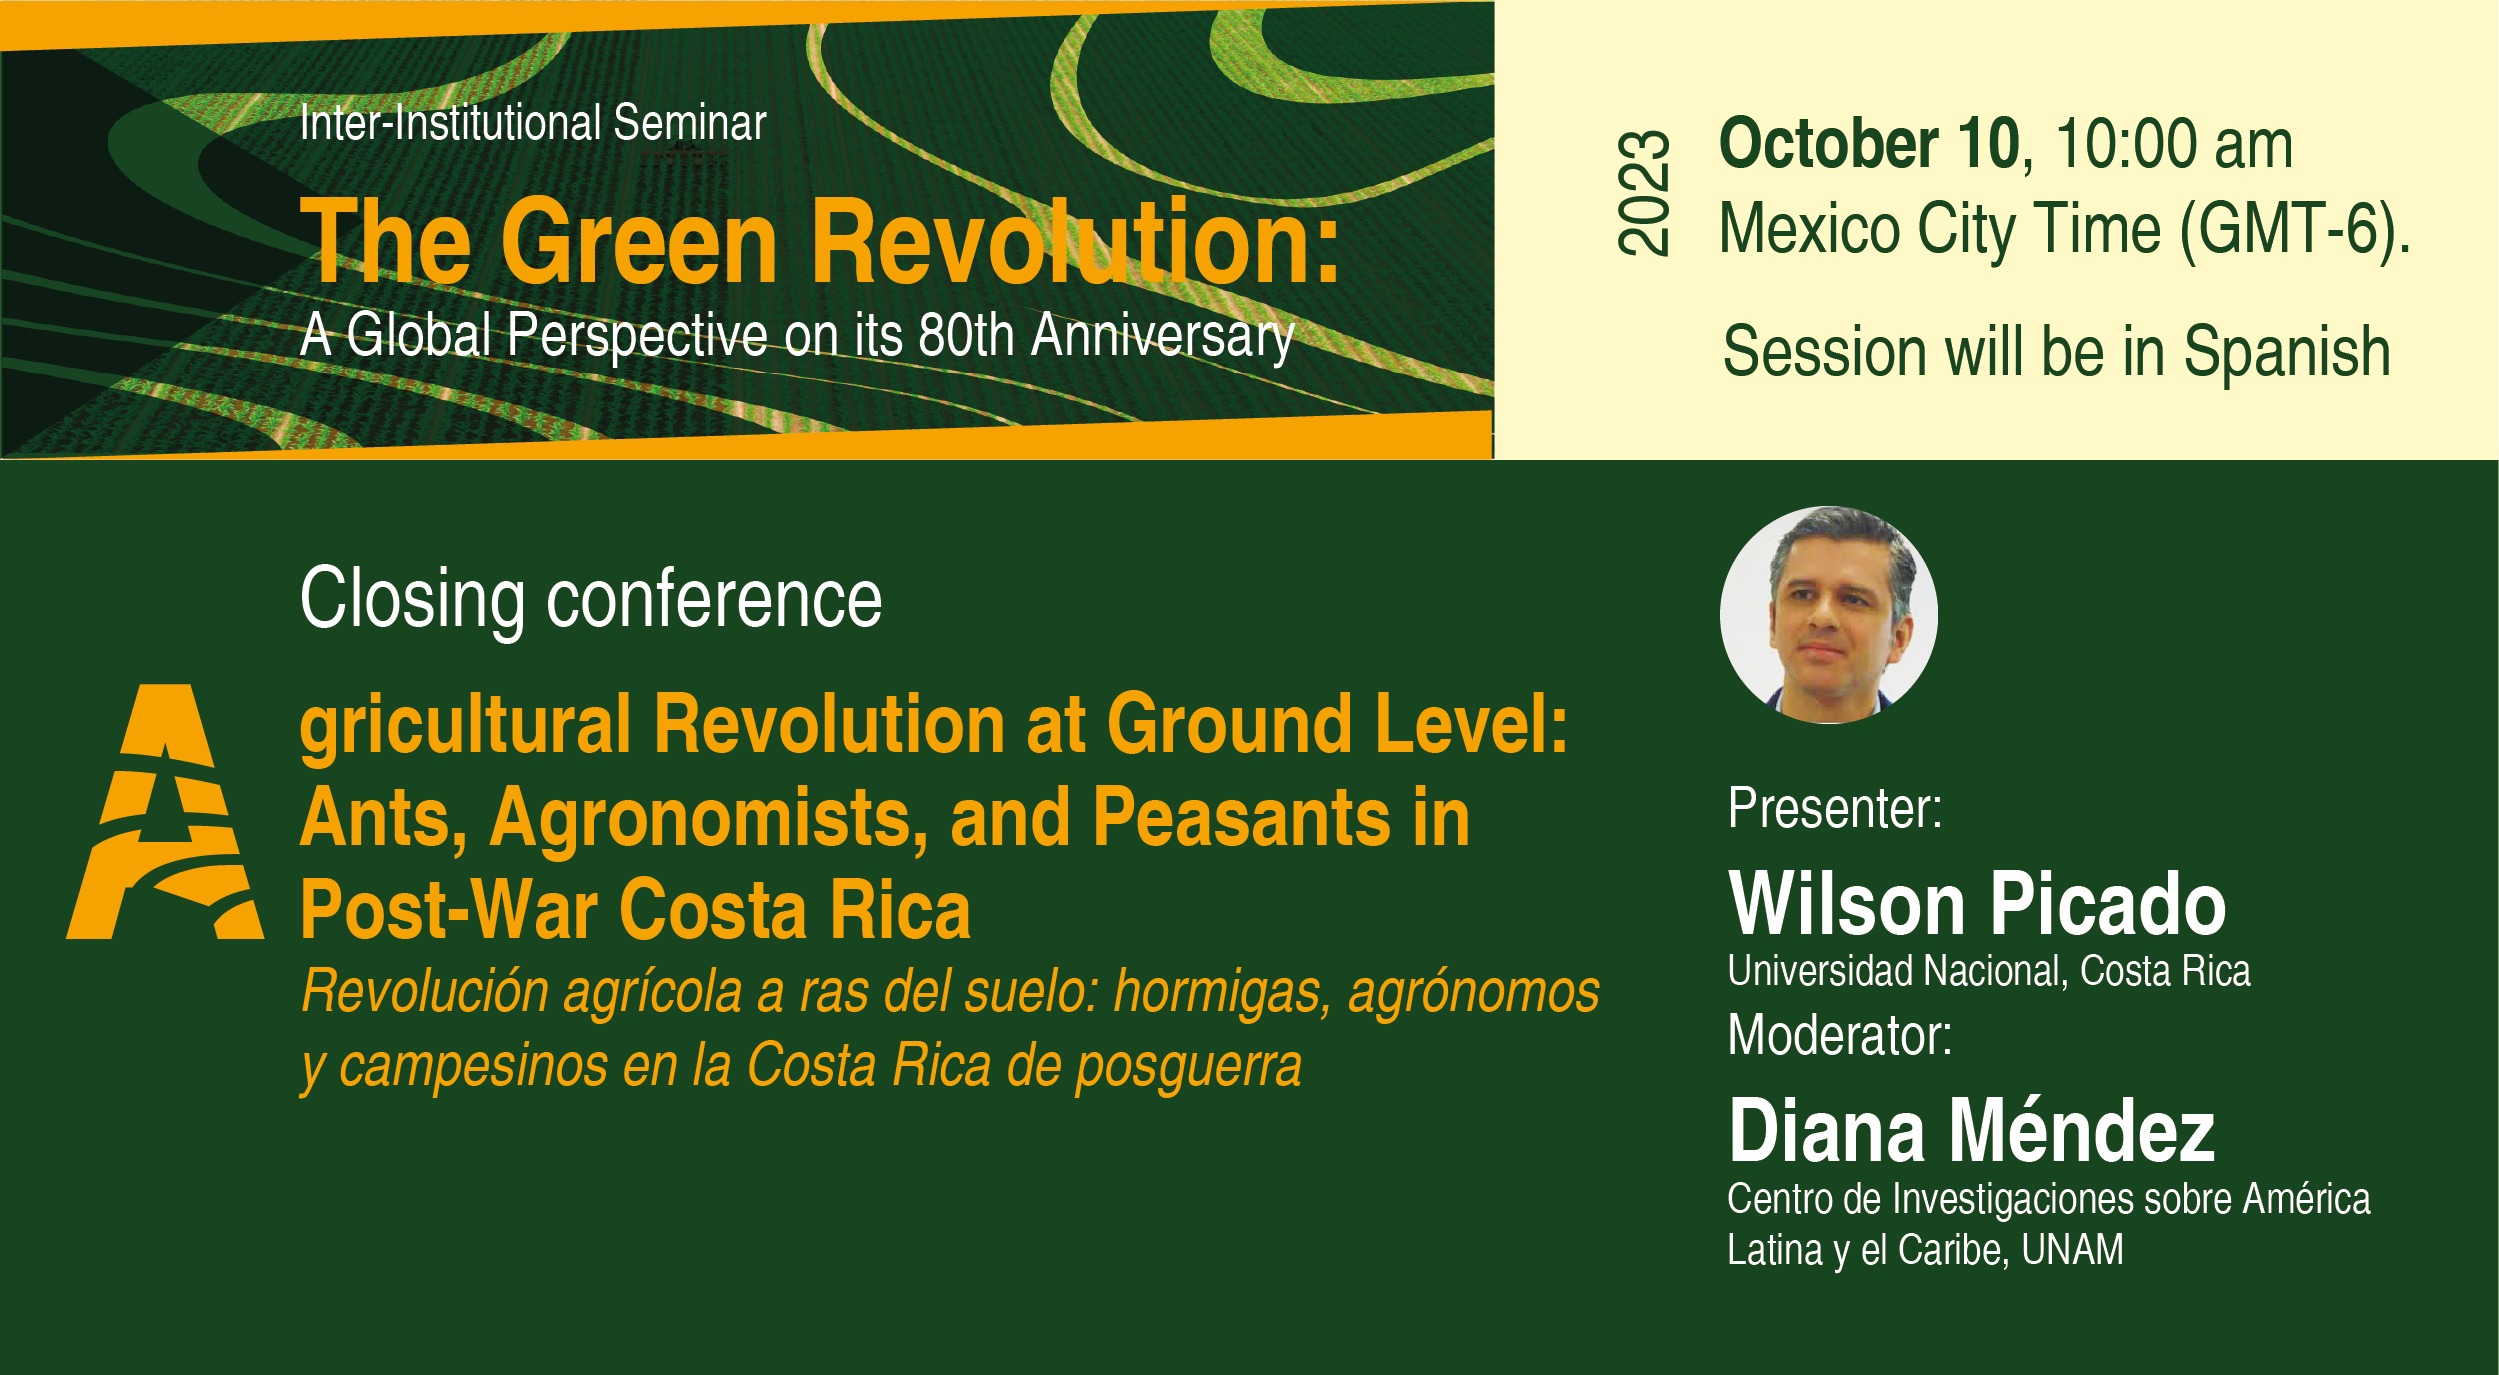 Closing conference. Agricultural Revolution at Ground Level: Ants, Agronomists, and Peasants in Post-War Costa Rica